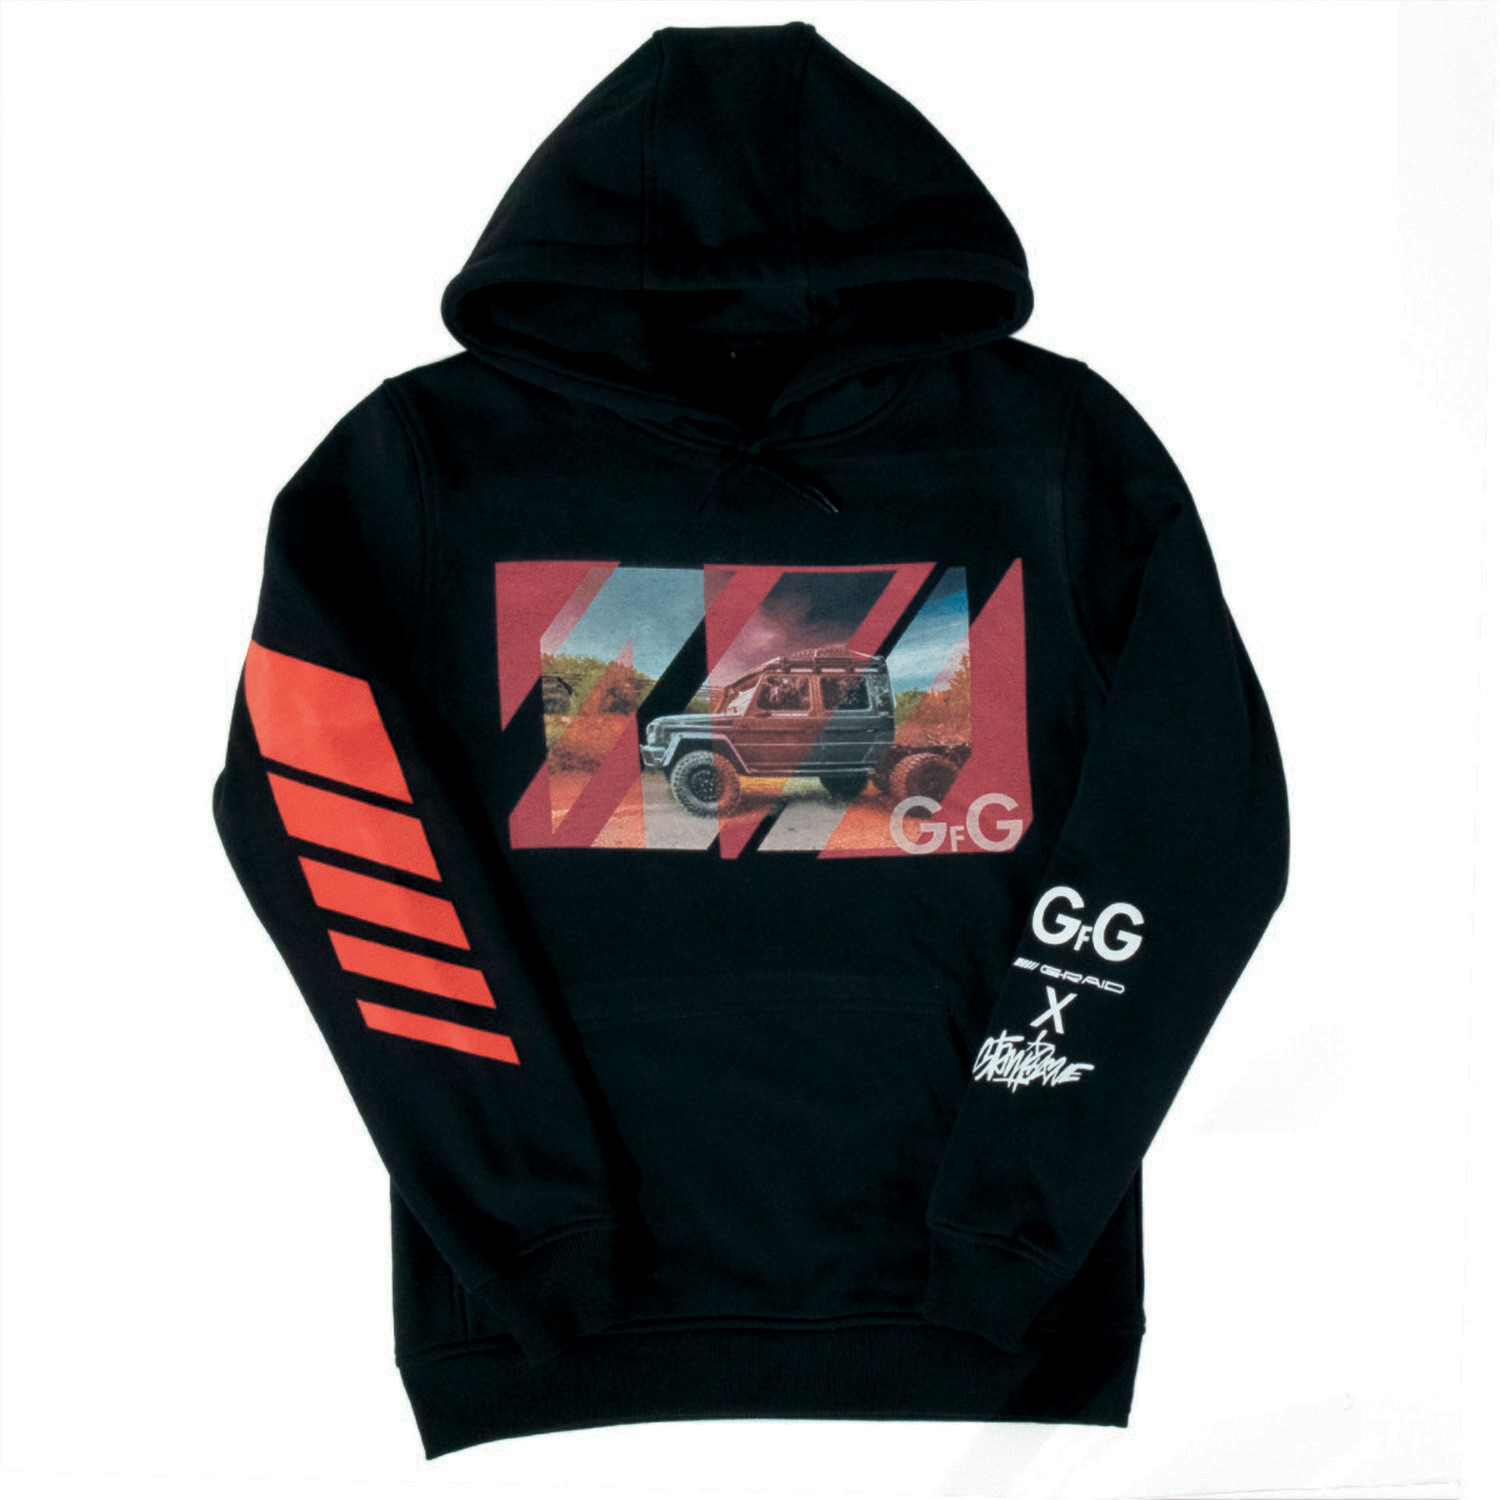 Special Edition Hoodie GfG x Stanis